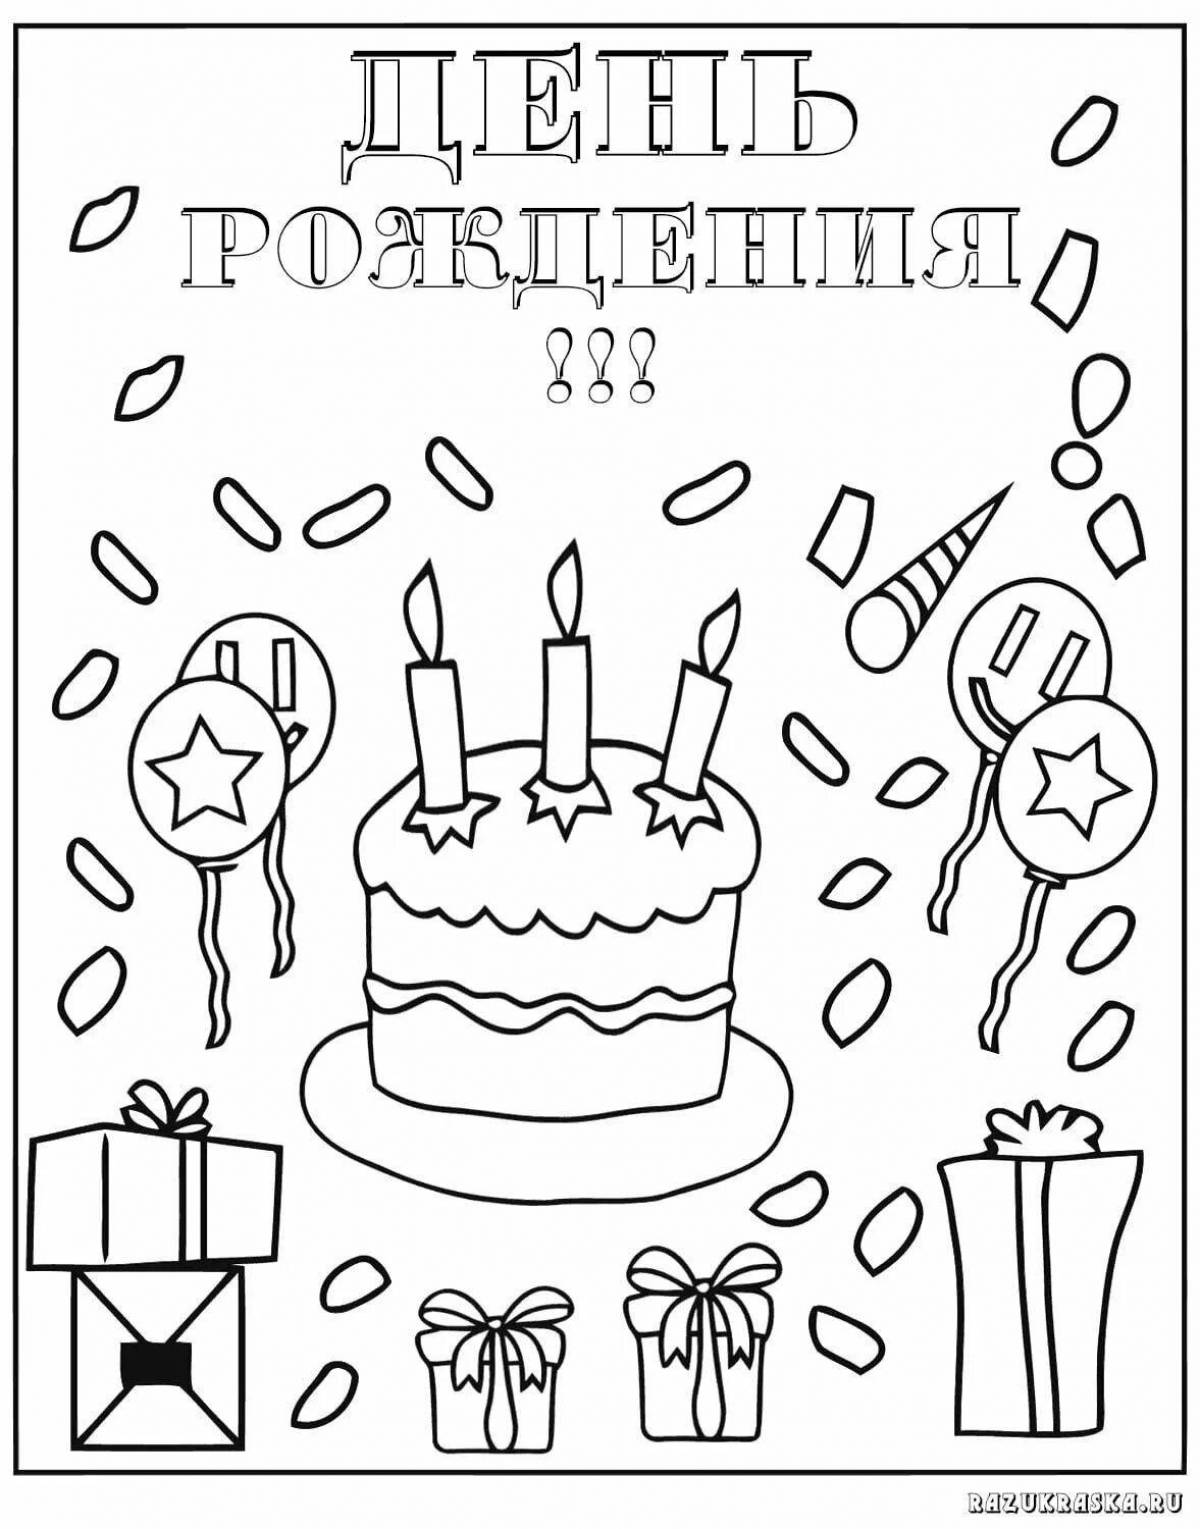 Coloring pages for dad happy birthday!